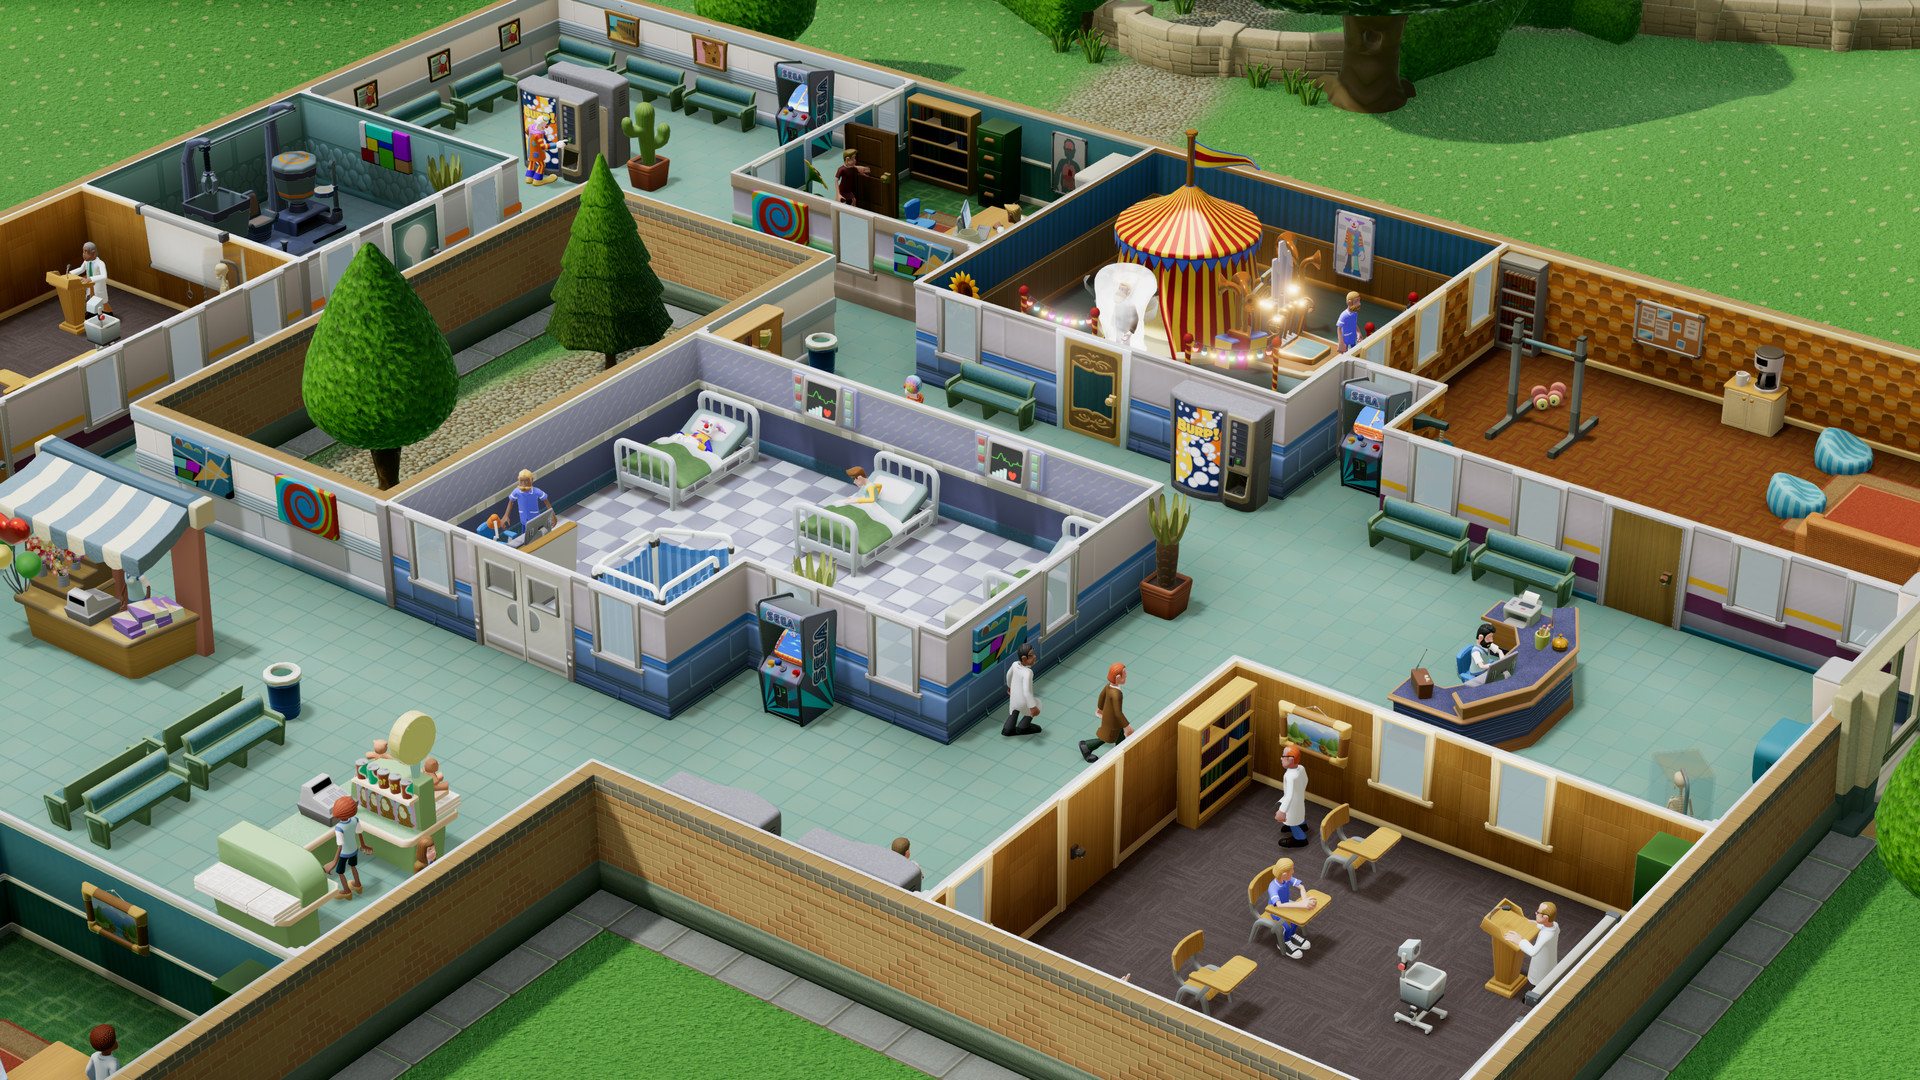 Two Point Hospital US Steam Altergift